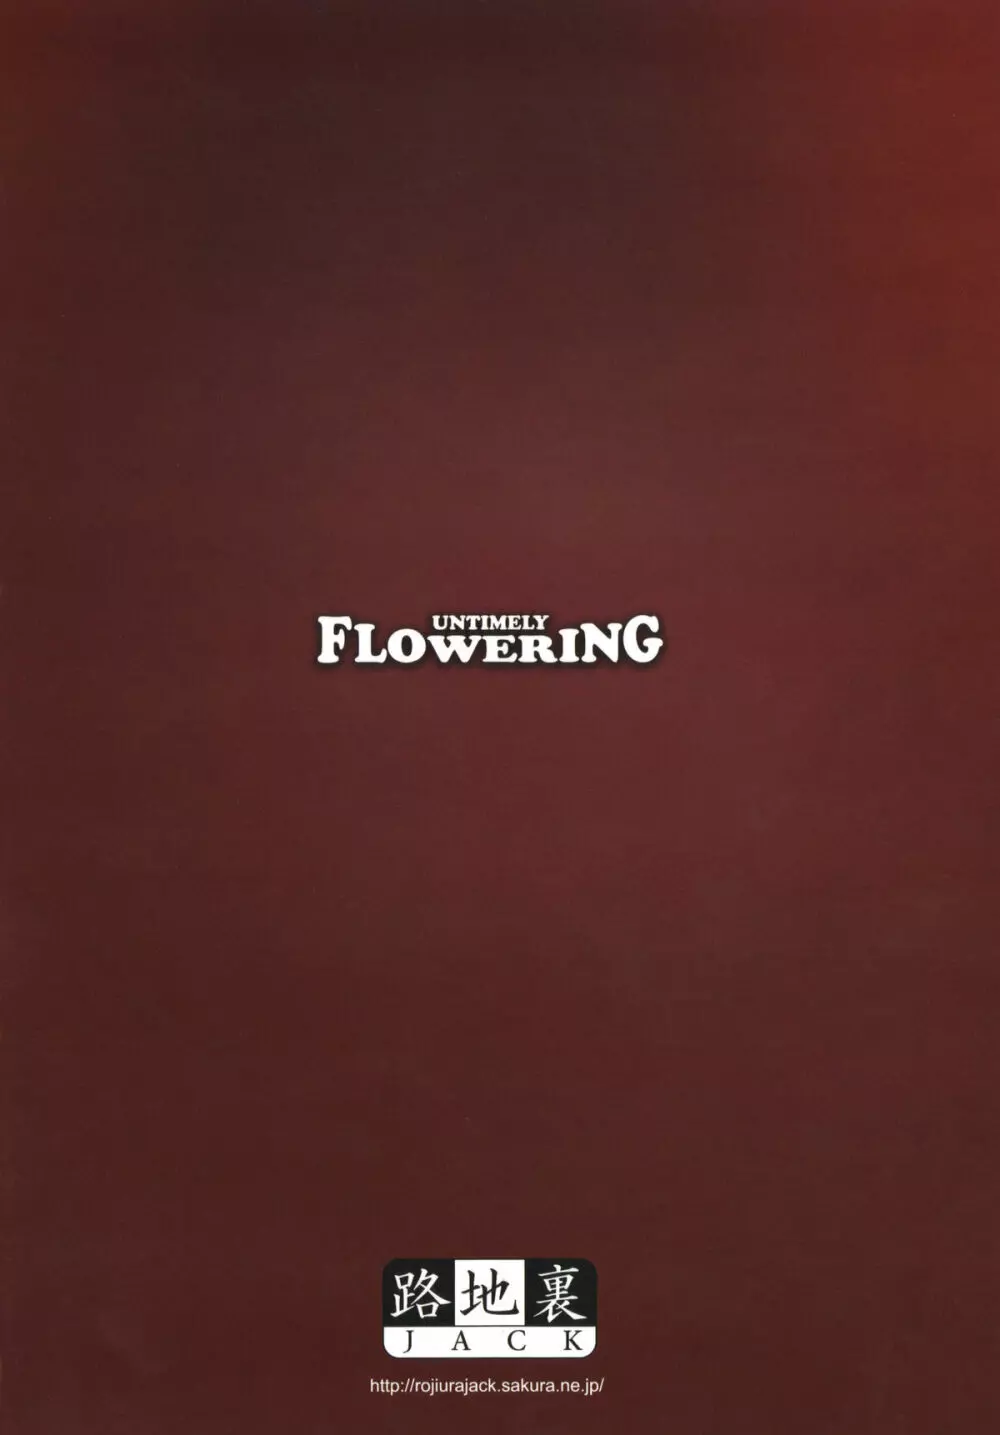 UNTIMELY FLOWERING 22ページ